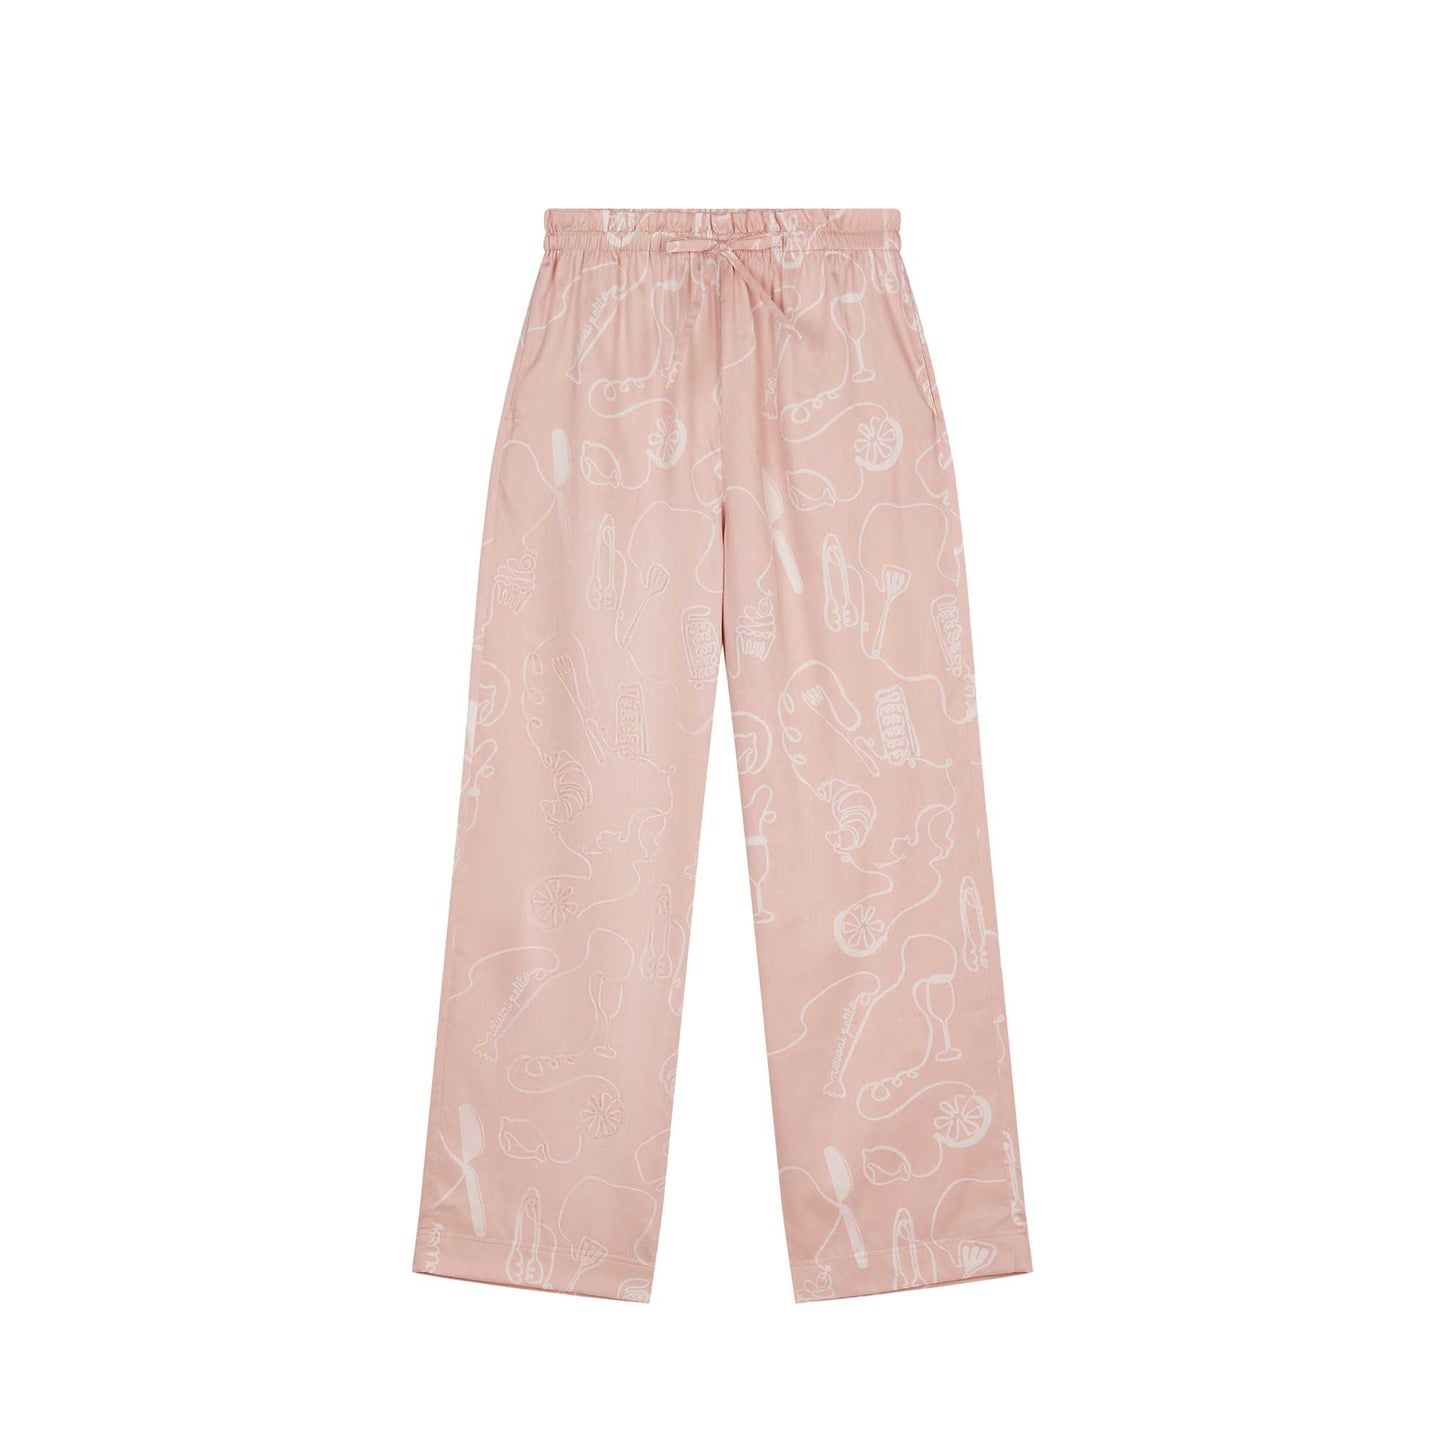 flat lay image of pink pajama pants with white sketches